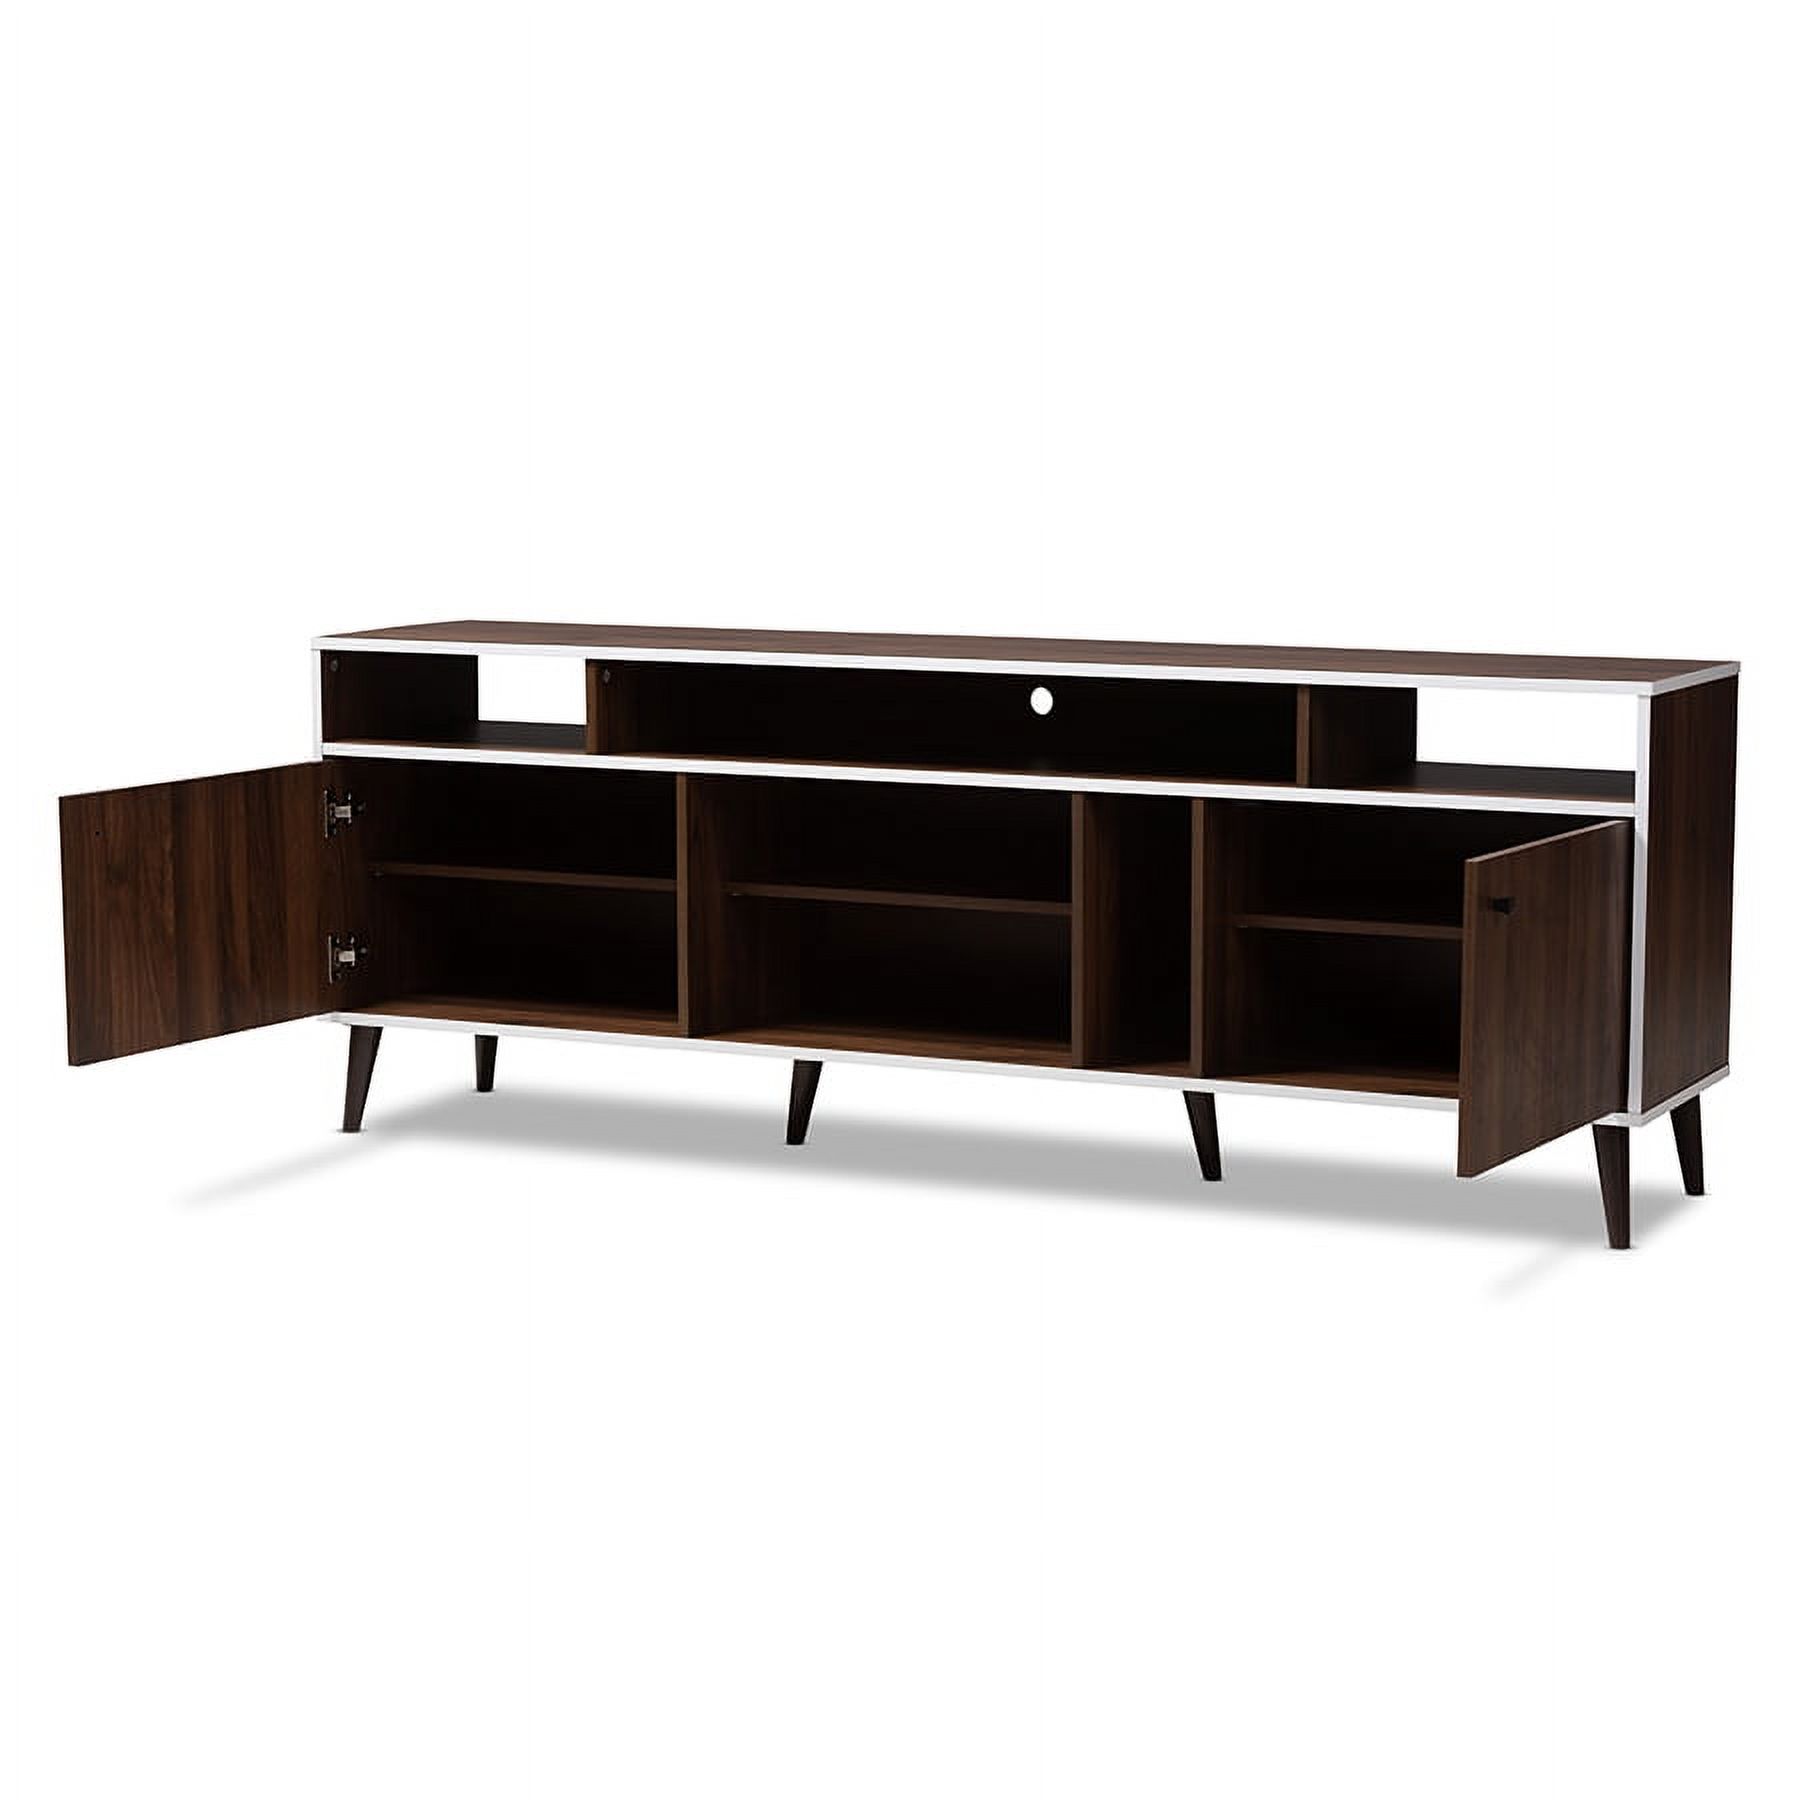 Baxton Studio Marion Mid-Century Modern Brown and White Finished TV Stand - image 3 of 7